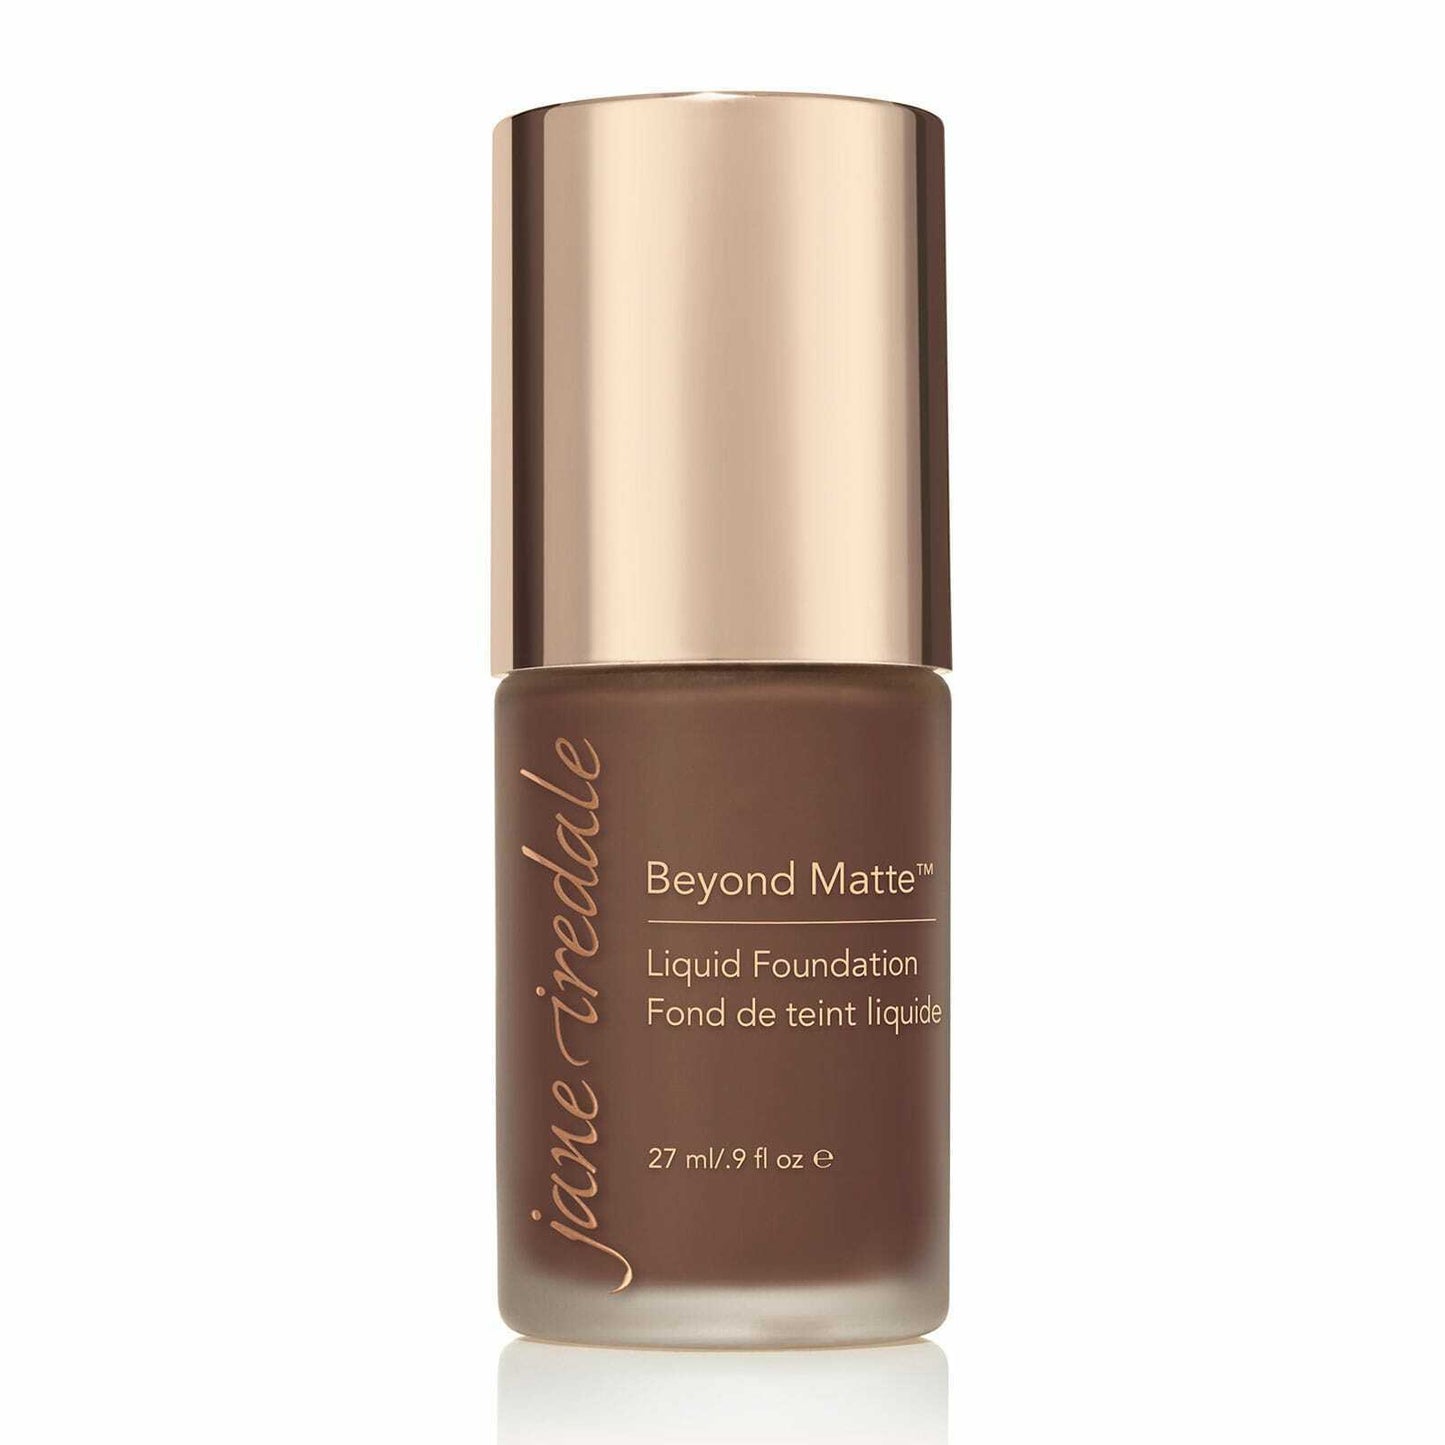 Jane Iredale Beyond Matte Liquid Foundation 27ml - M17  Introducing Beyond Matte Liquid Foundation!  With buildable coverage and a semi-matte finish, this is a skin-loving, clean, vegan liquid foundation.  A primer, concealer and foundation - all in one!